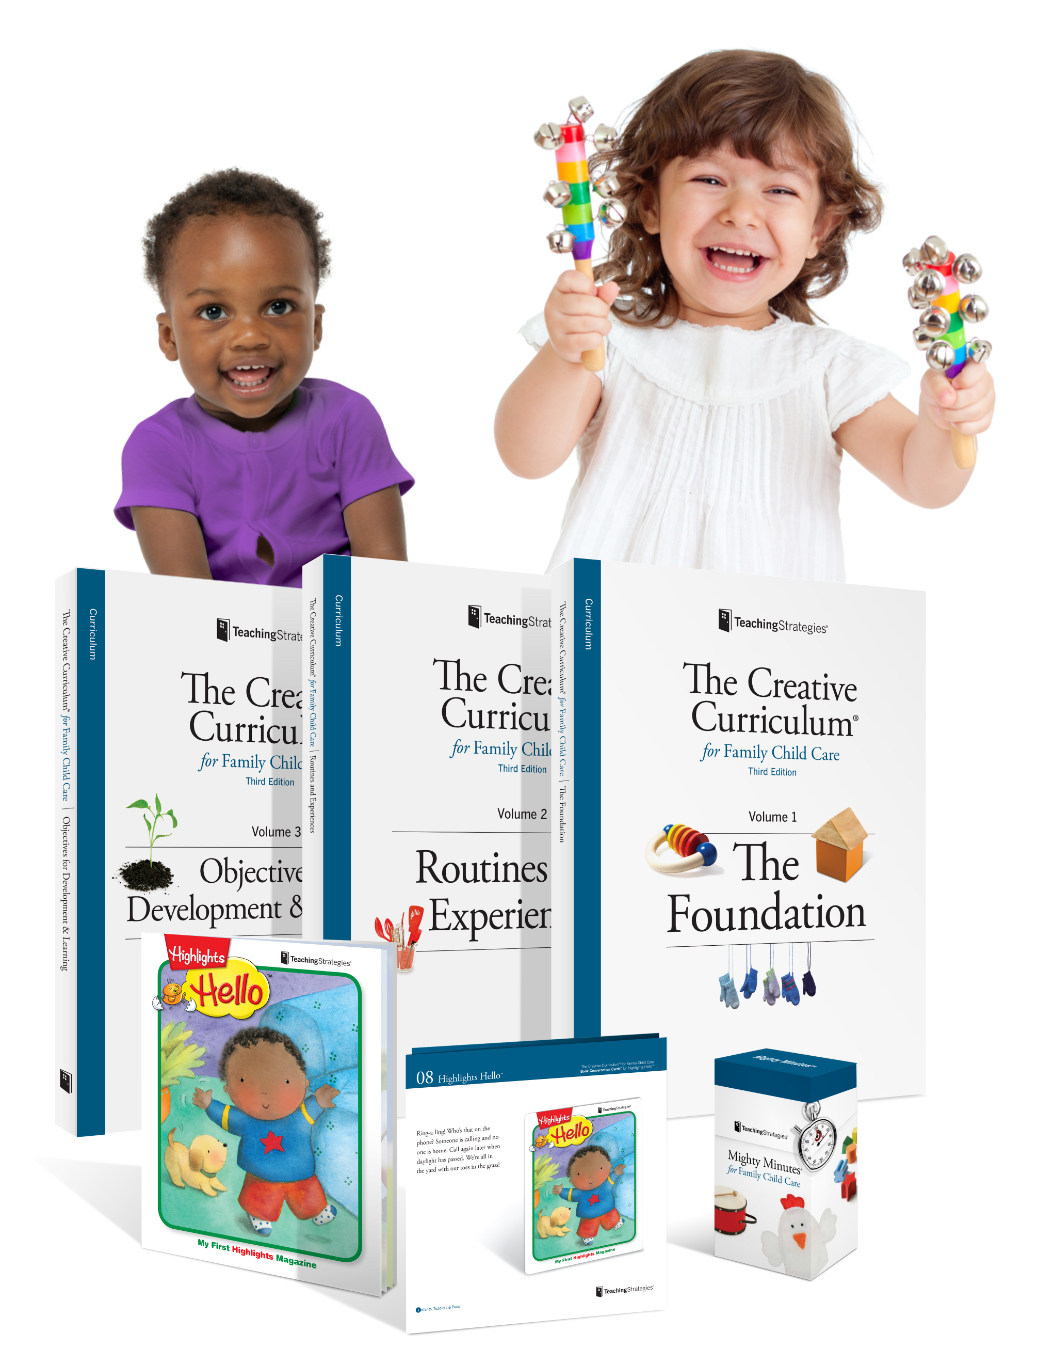 two happy children laughing with family child care products